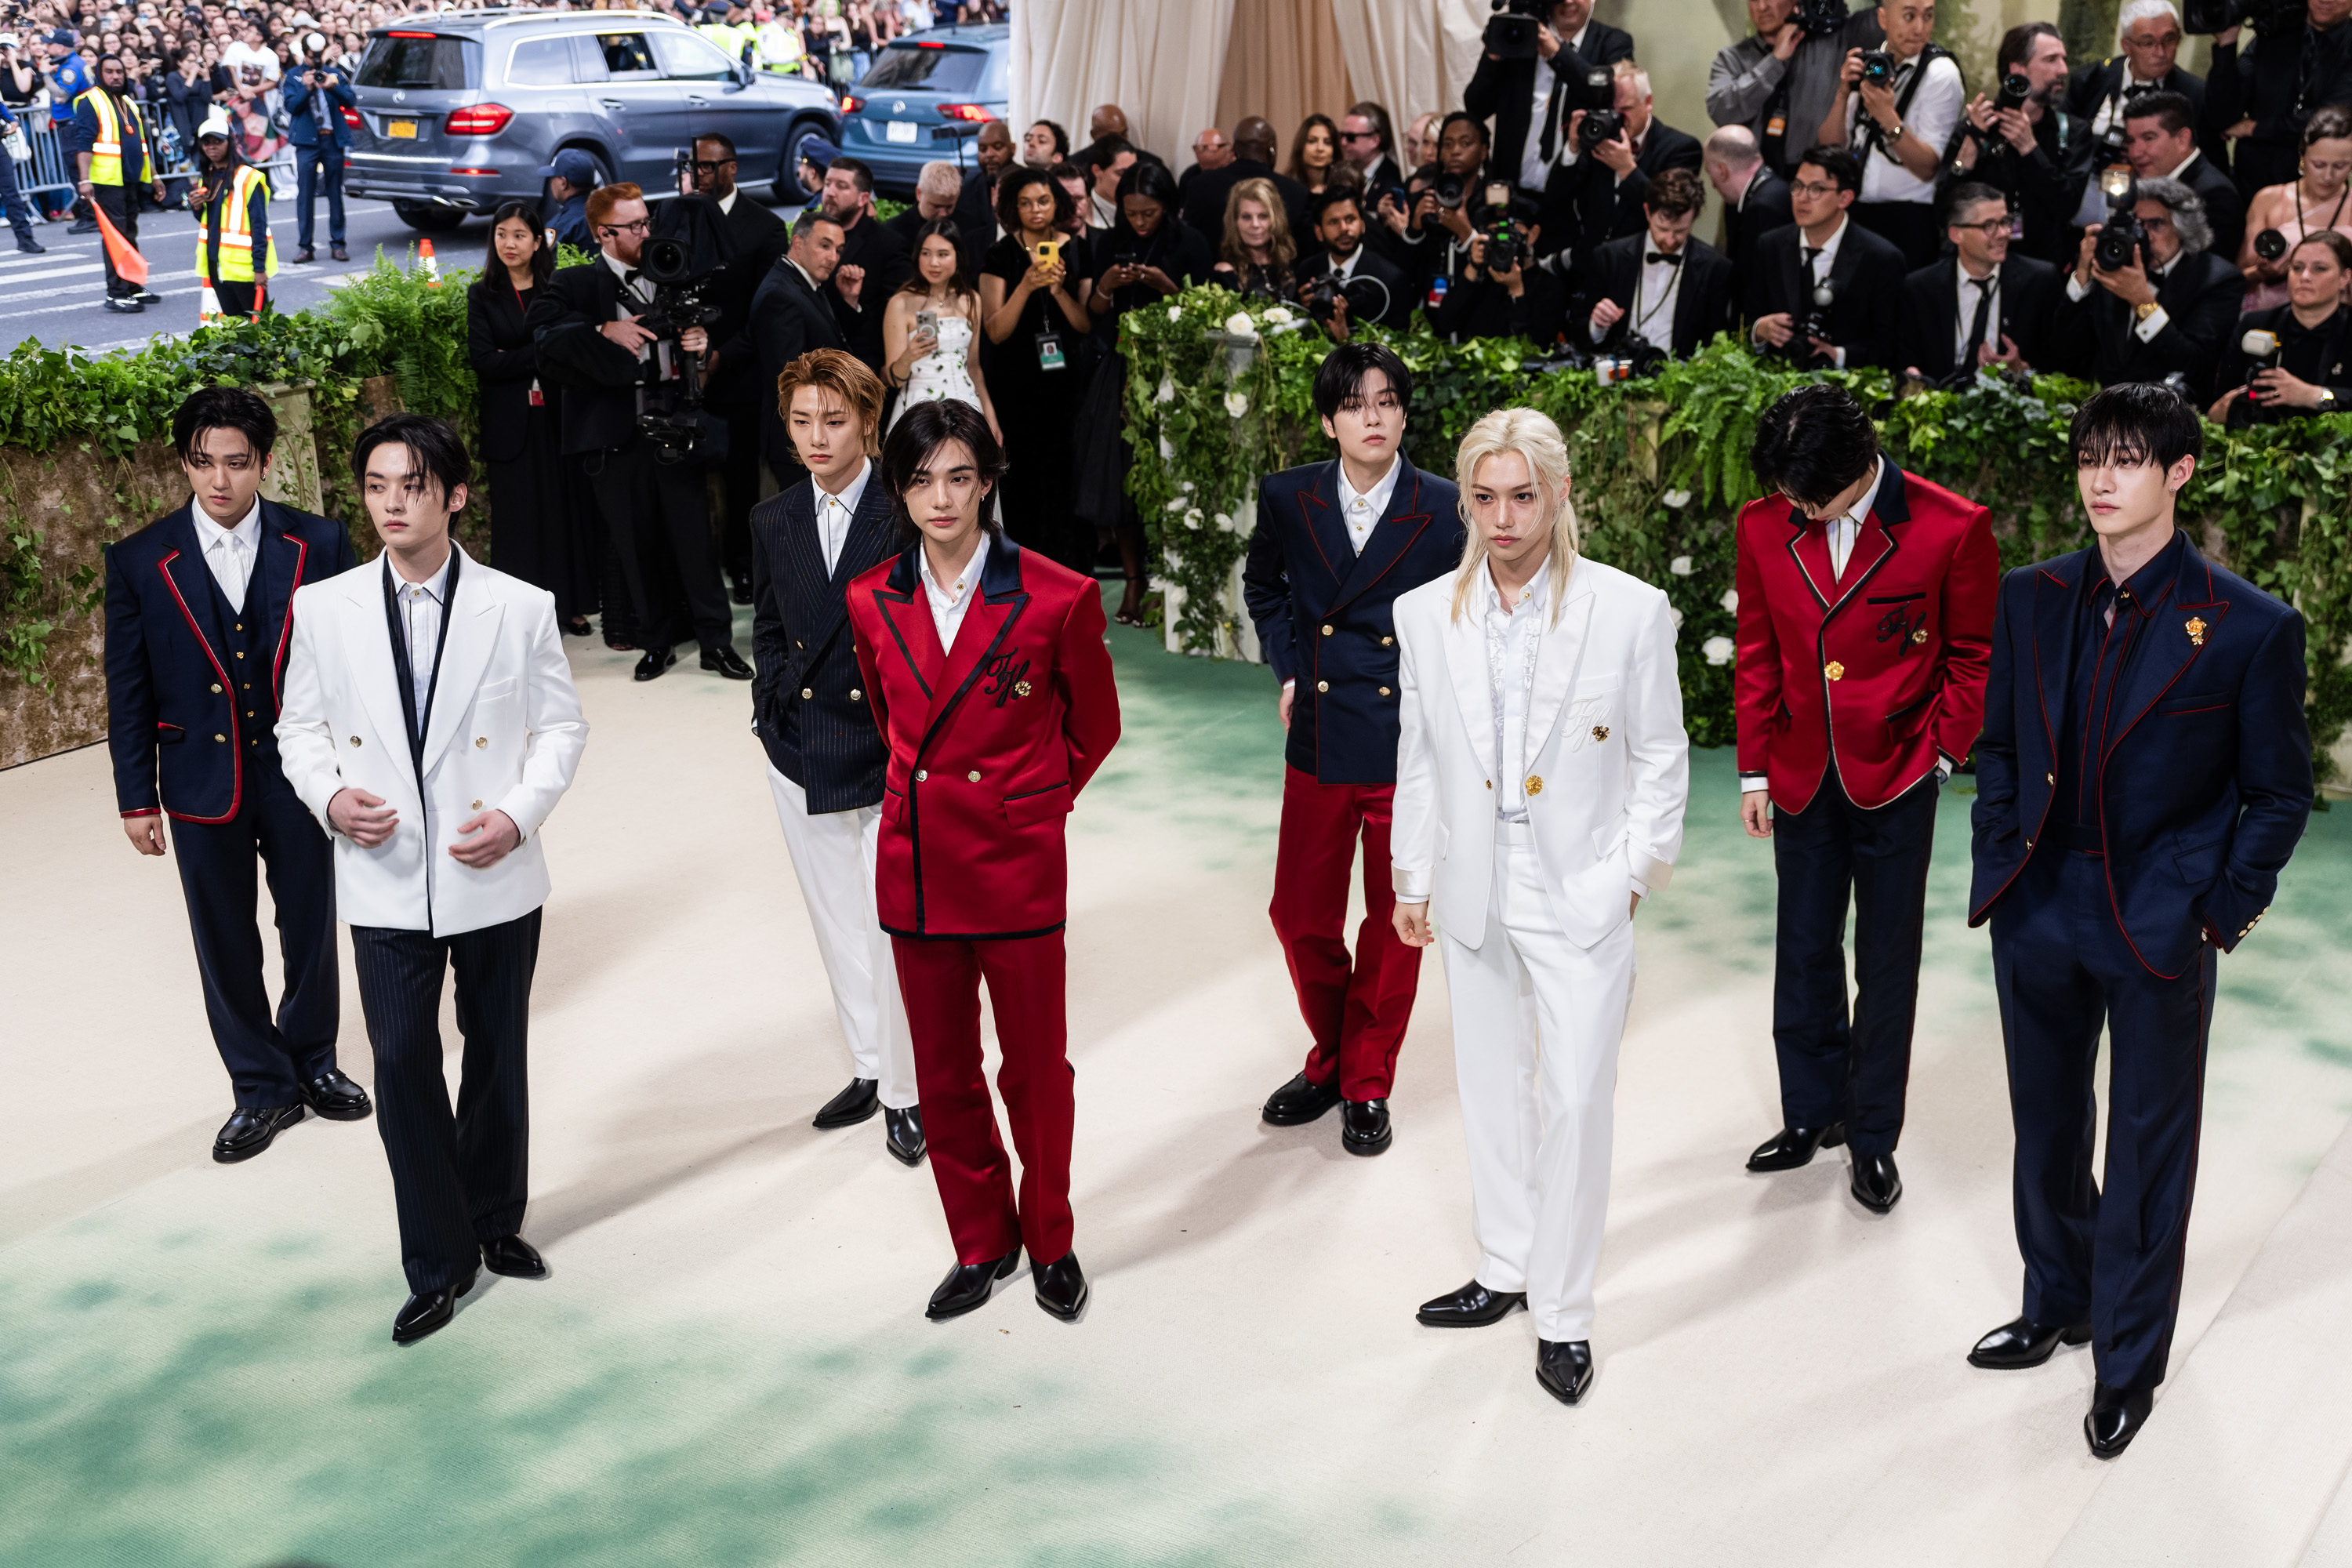 Seven members of BTS in formal suits, walking in line at an event